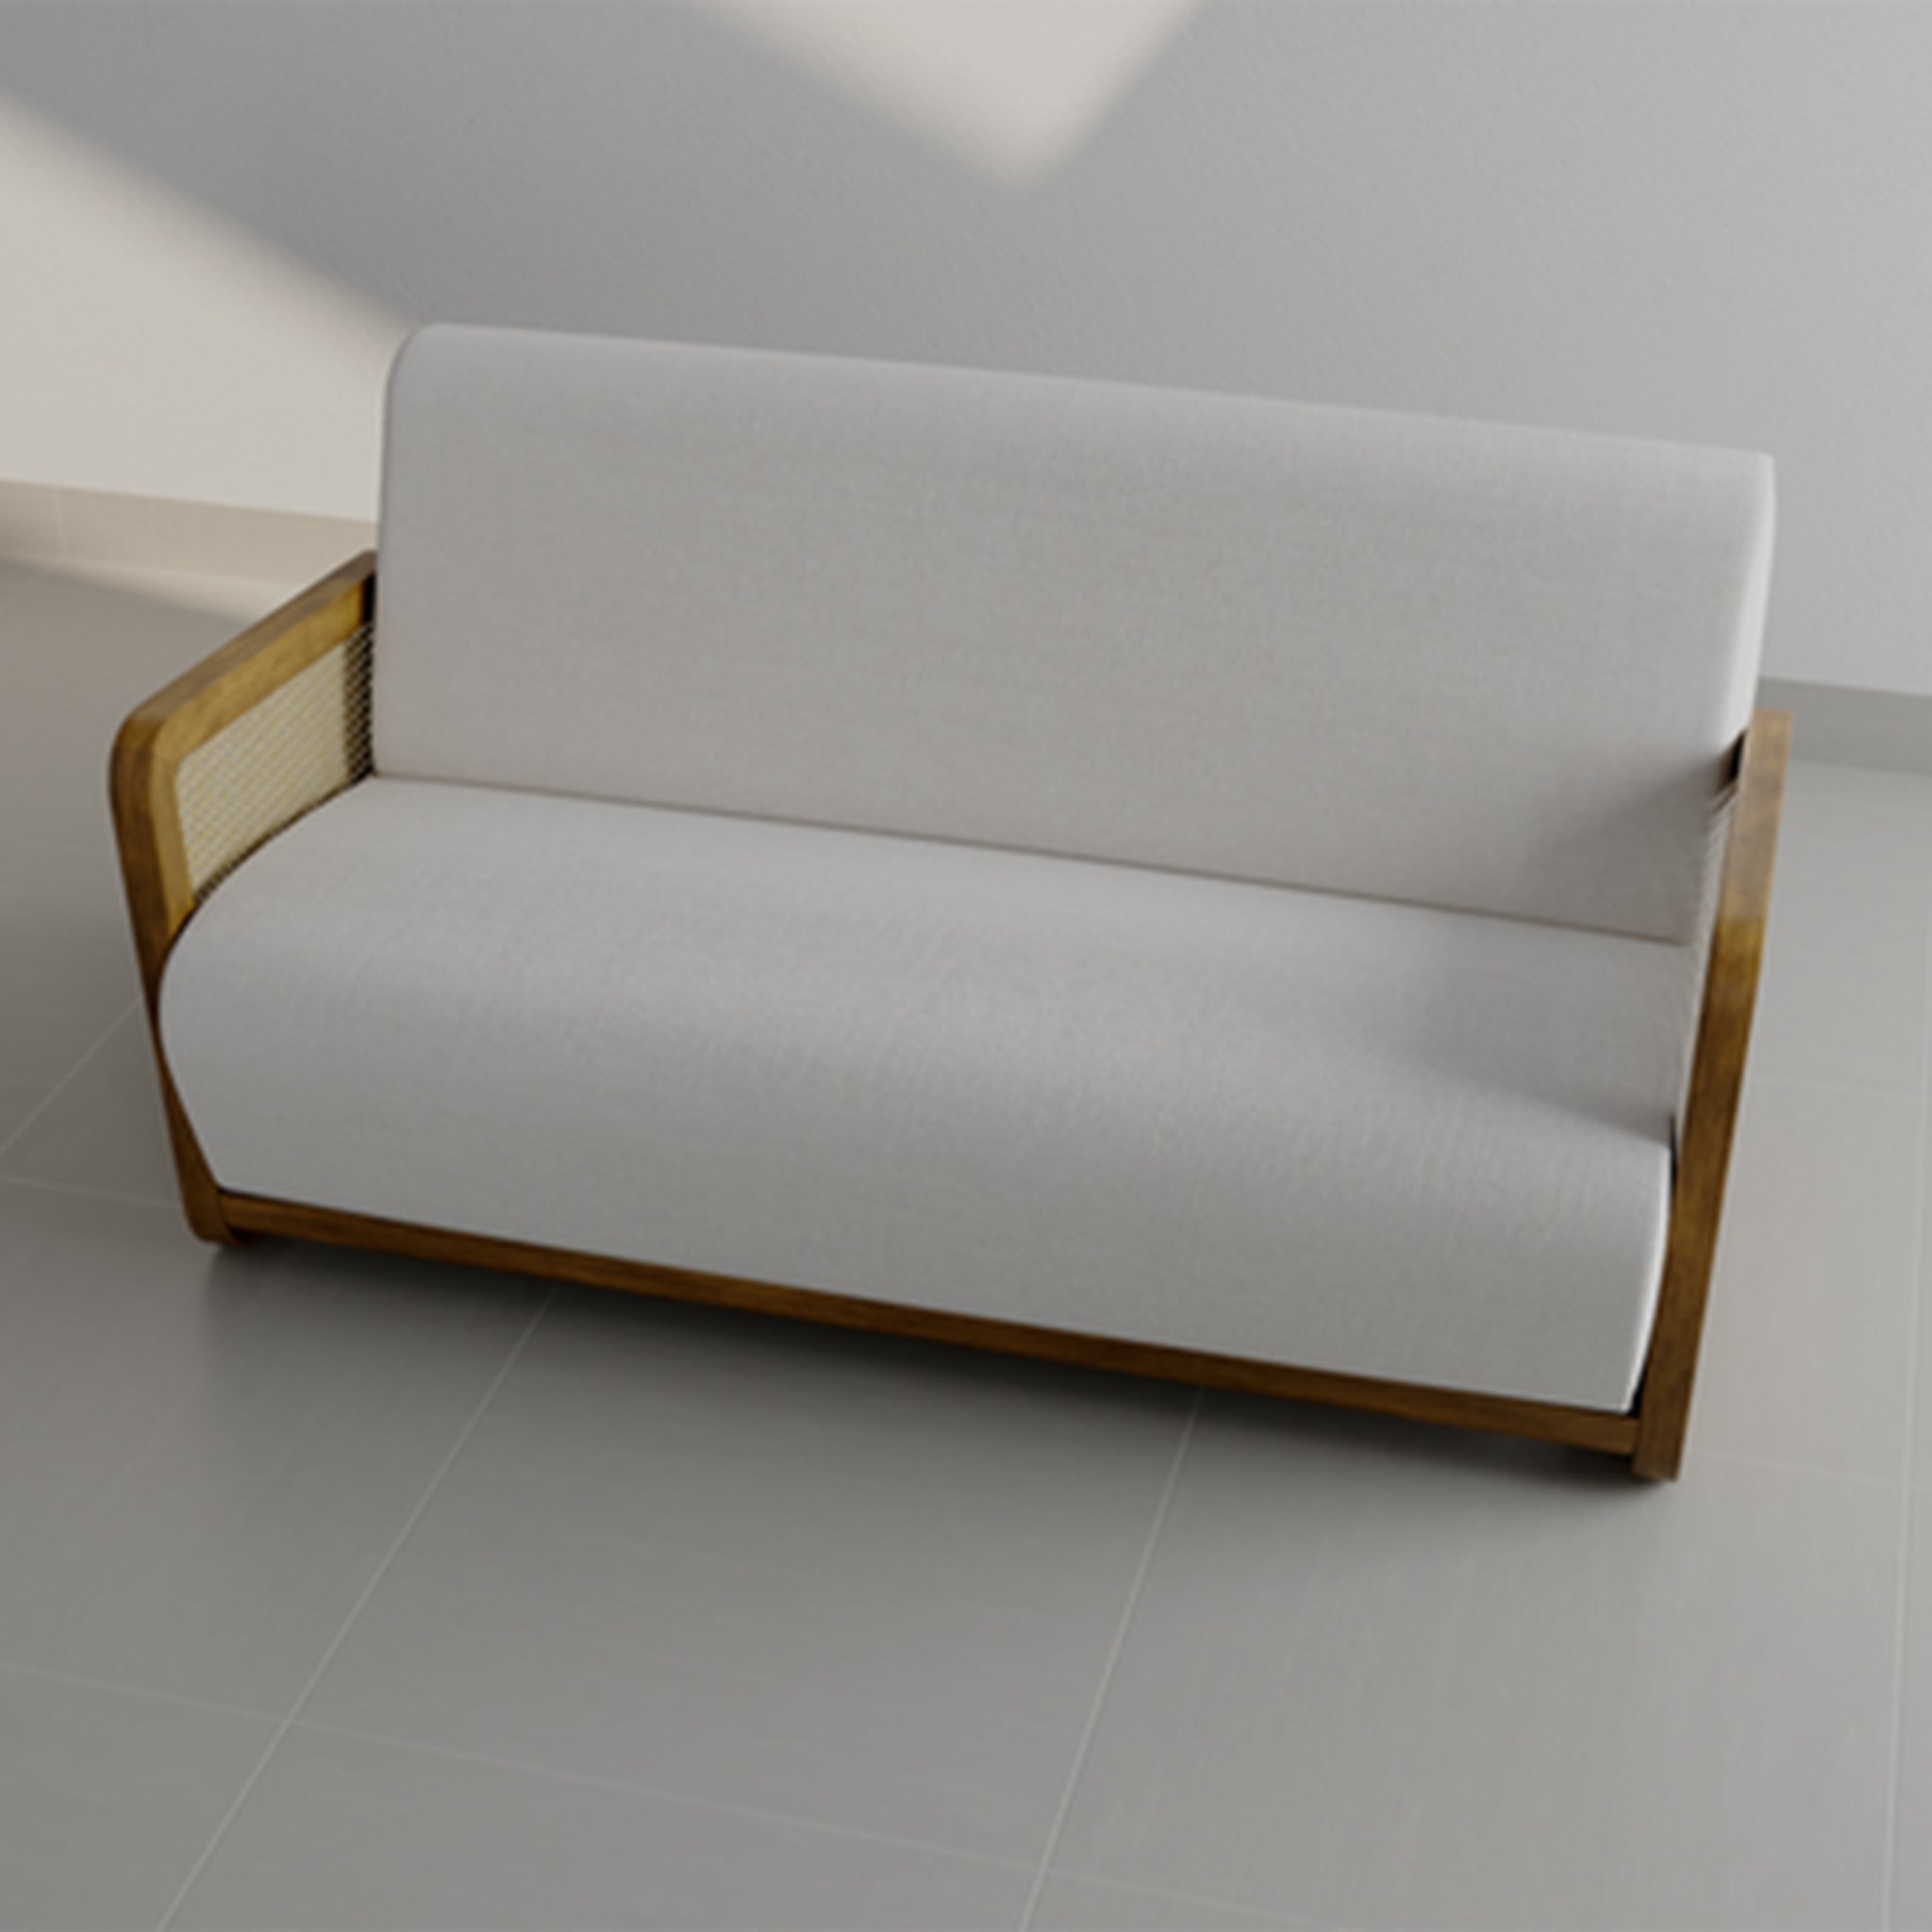 "Sophisticated The Georgia Accent Chair with white upholstery and natural wooden sides."